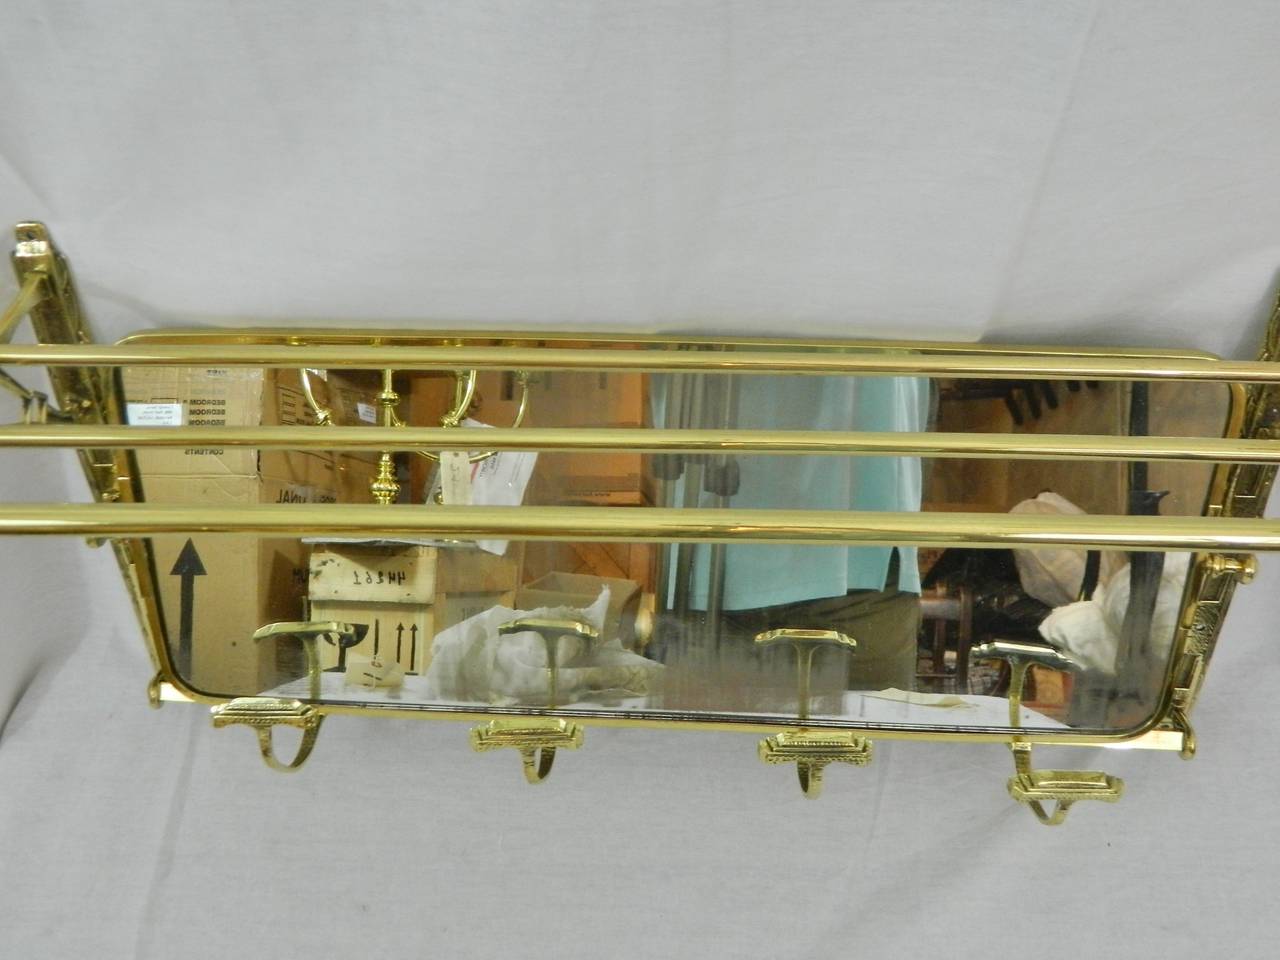 French Polished Brass Coat Rack with a Top Rack and Original Mirror, 19th Century